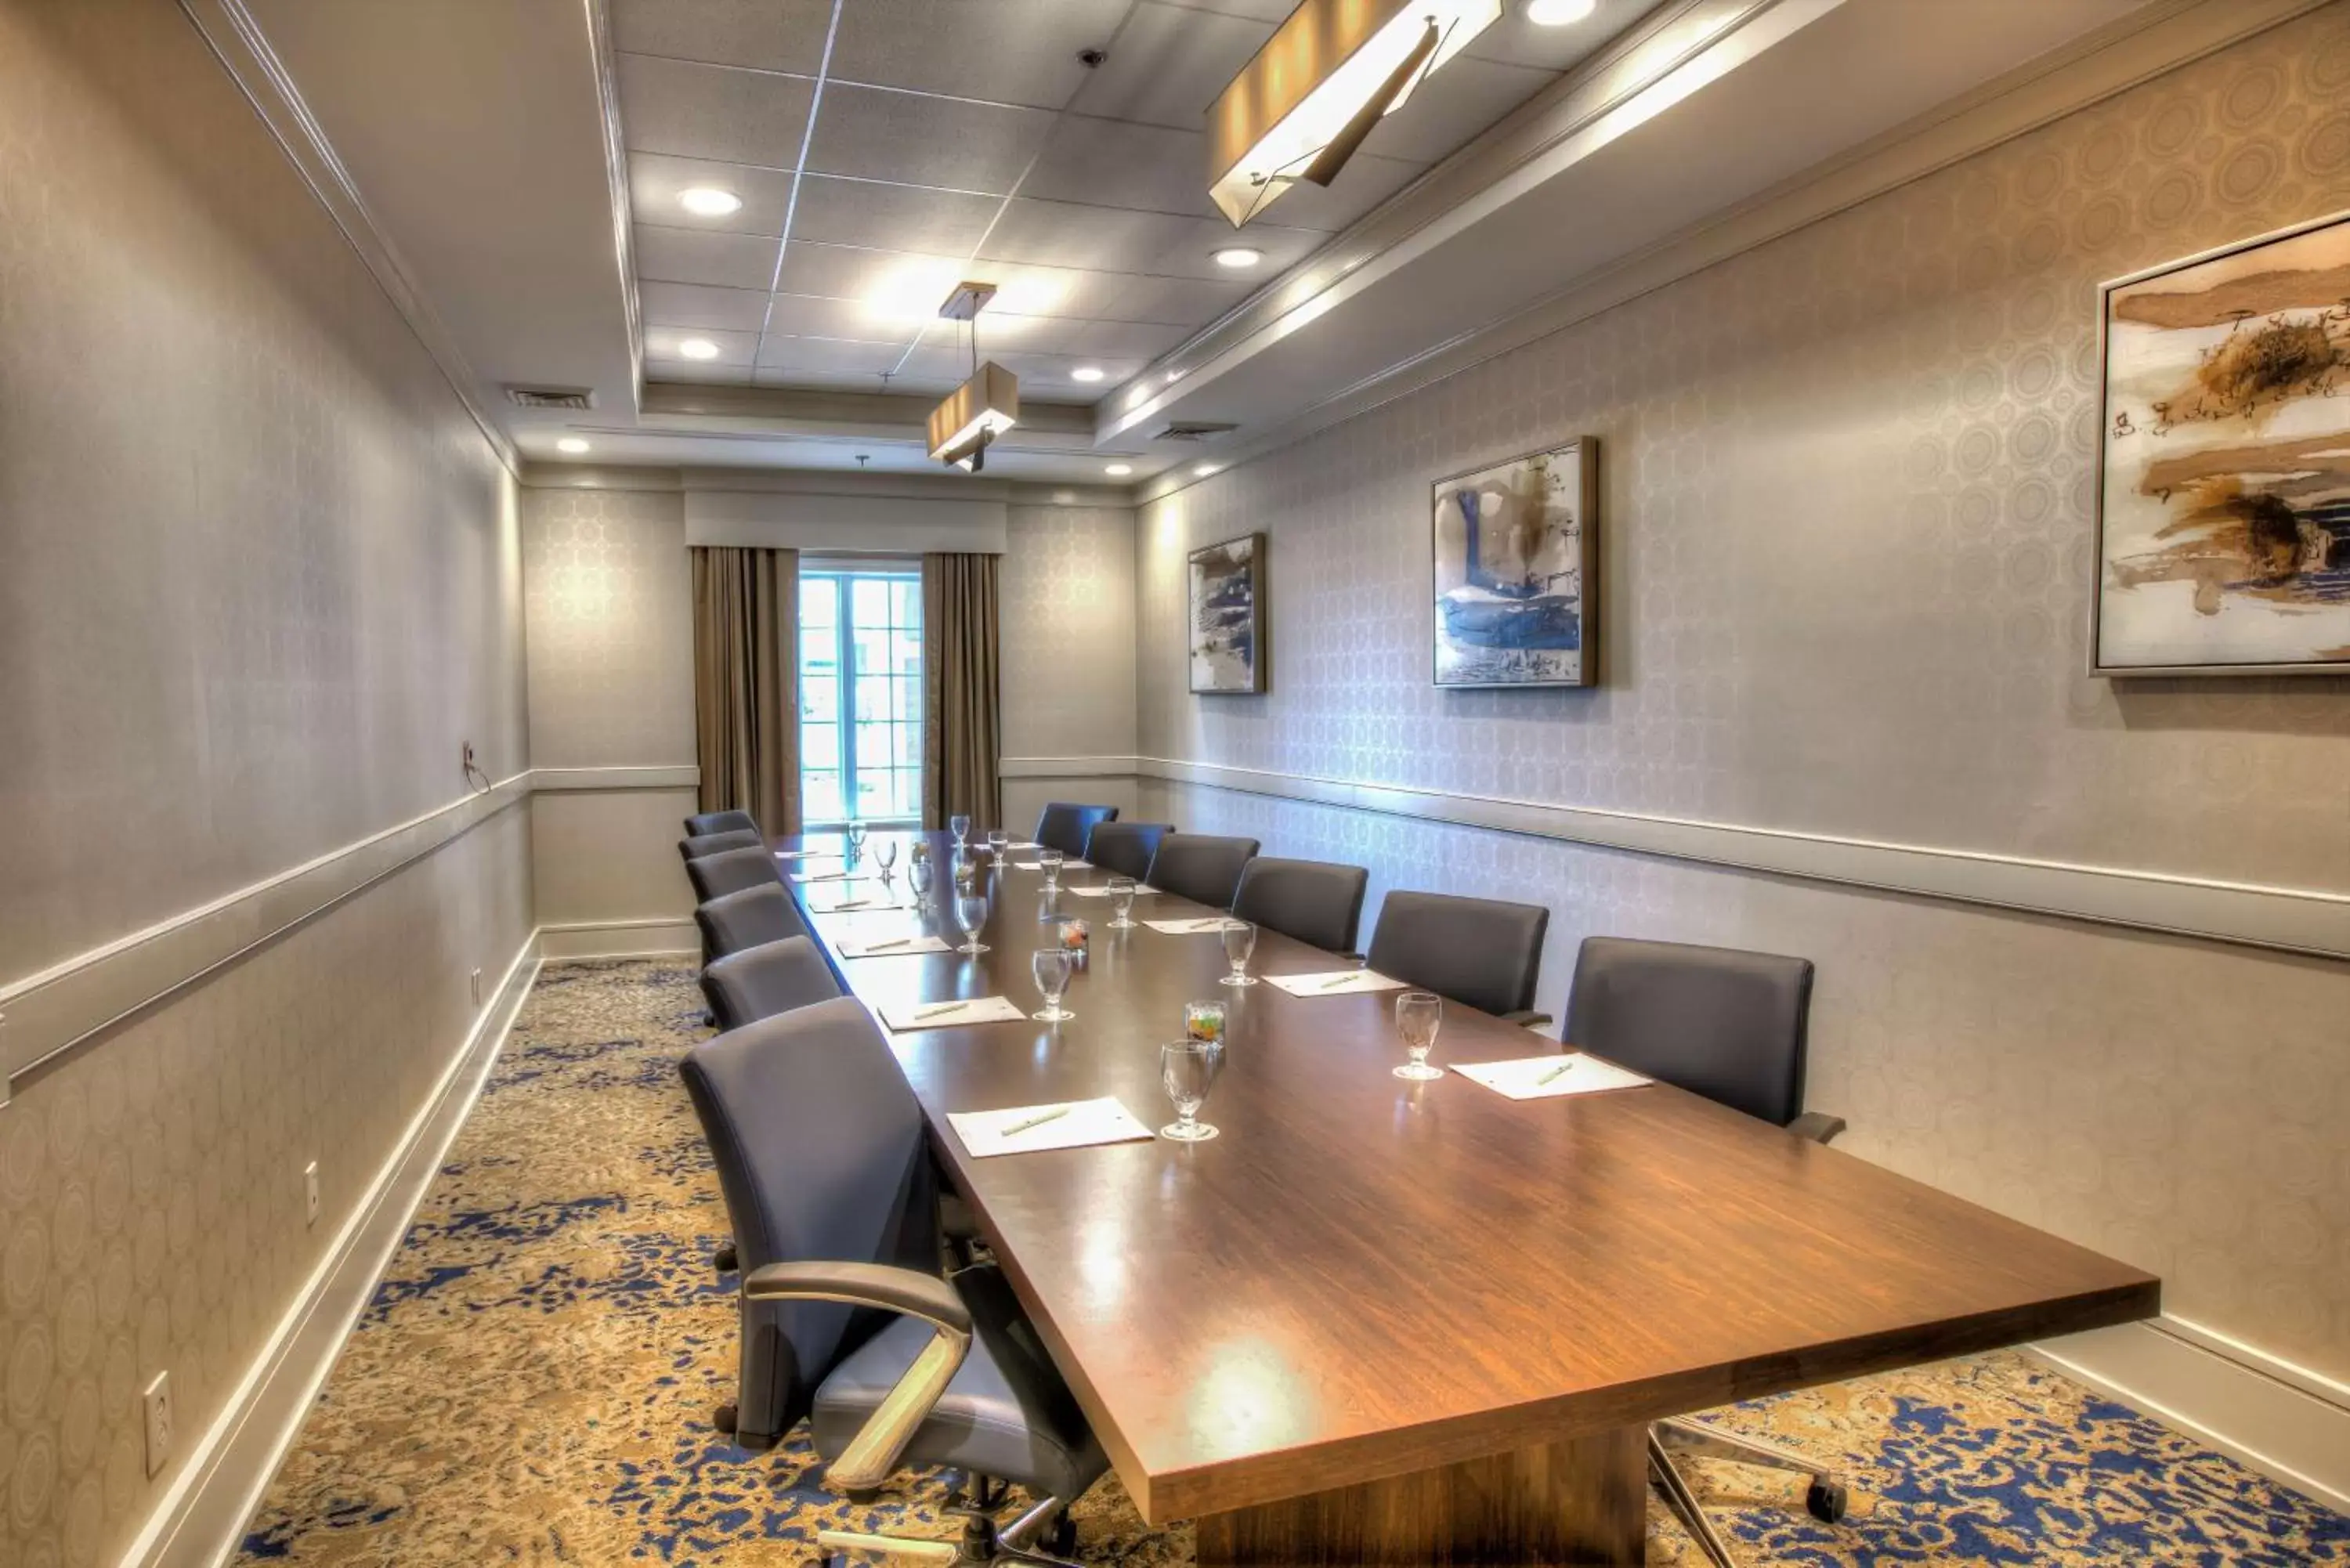 Meeting/conference room in Doubletree Suites by Hilton at The Battery Atlanta